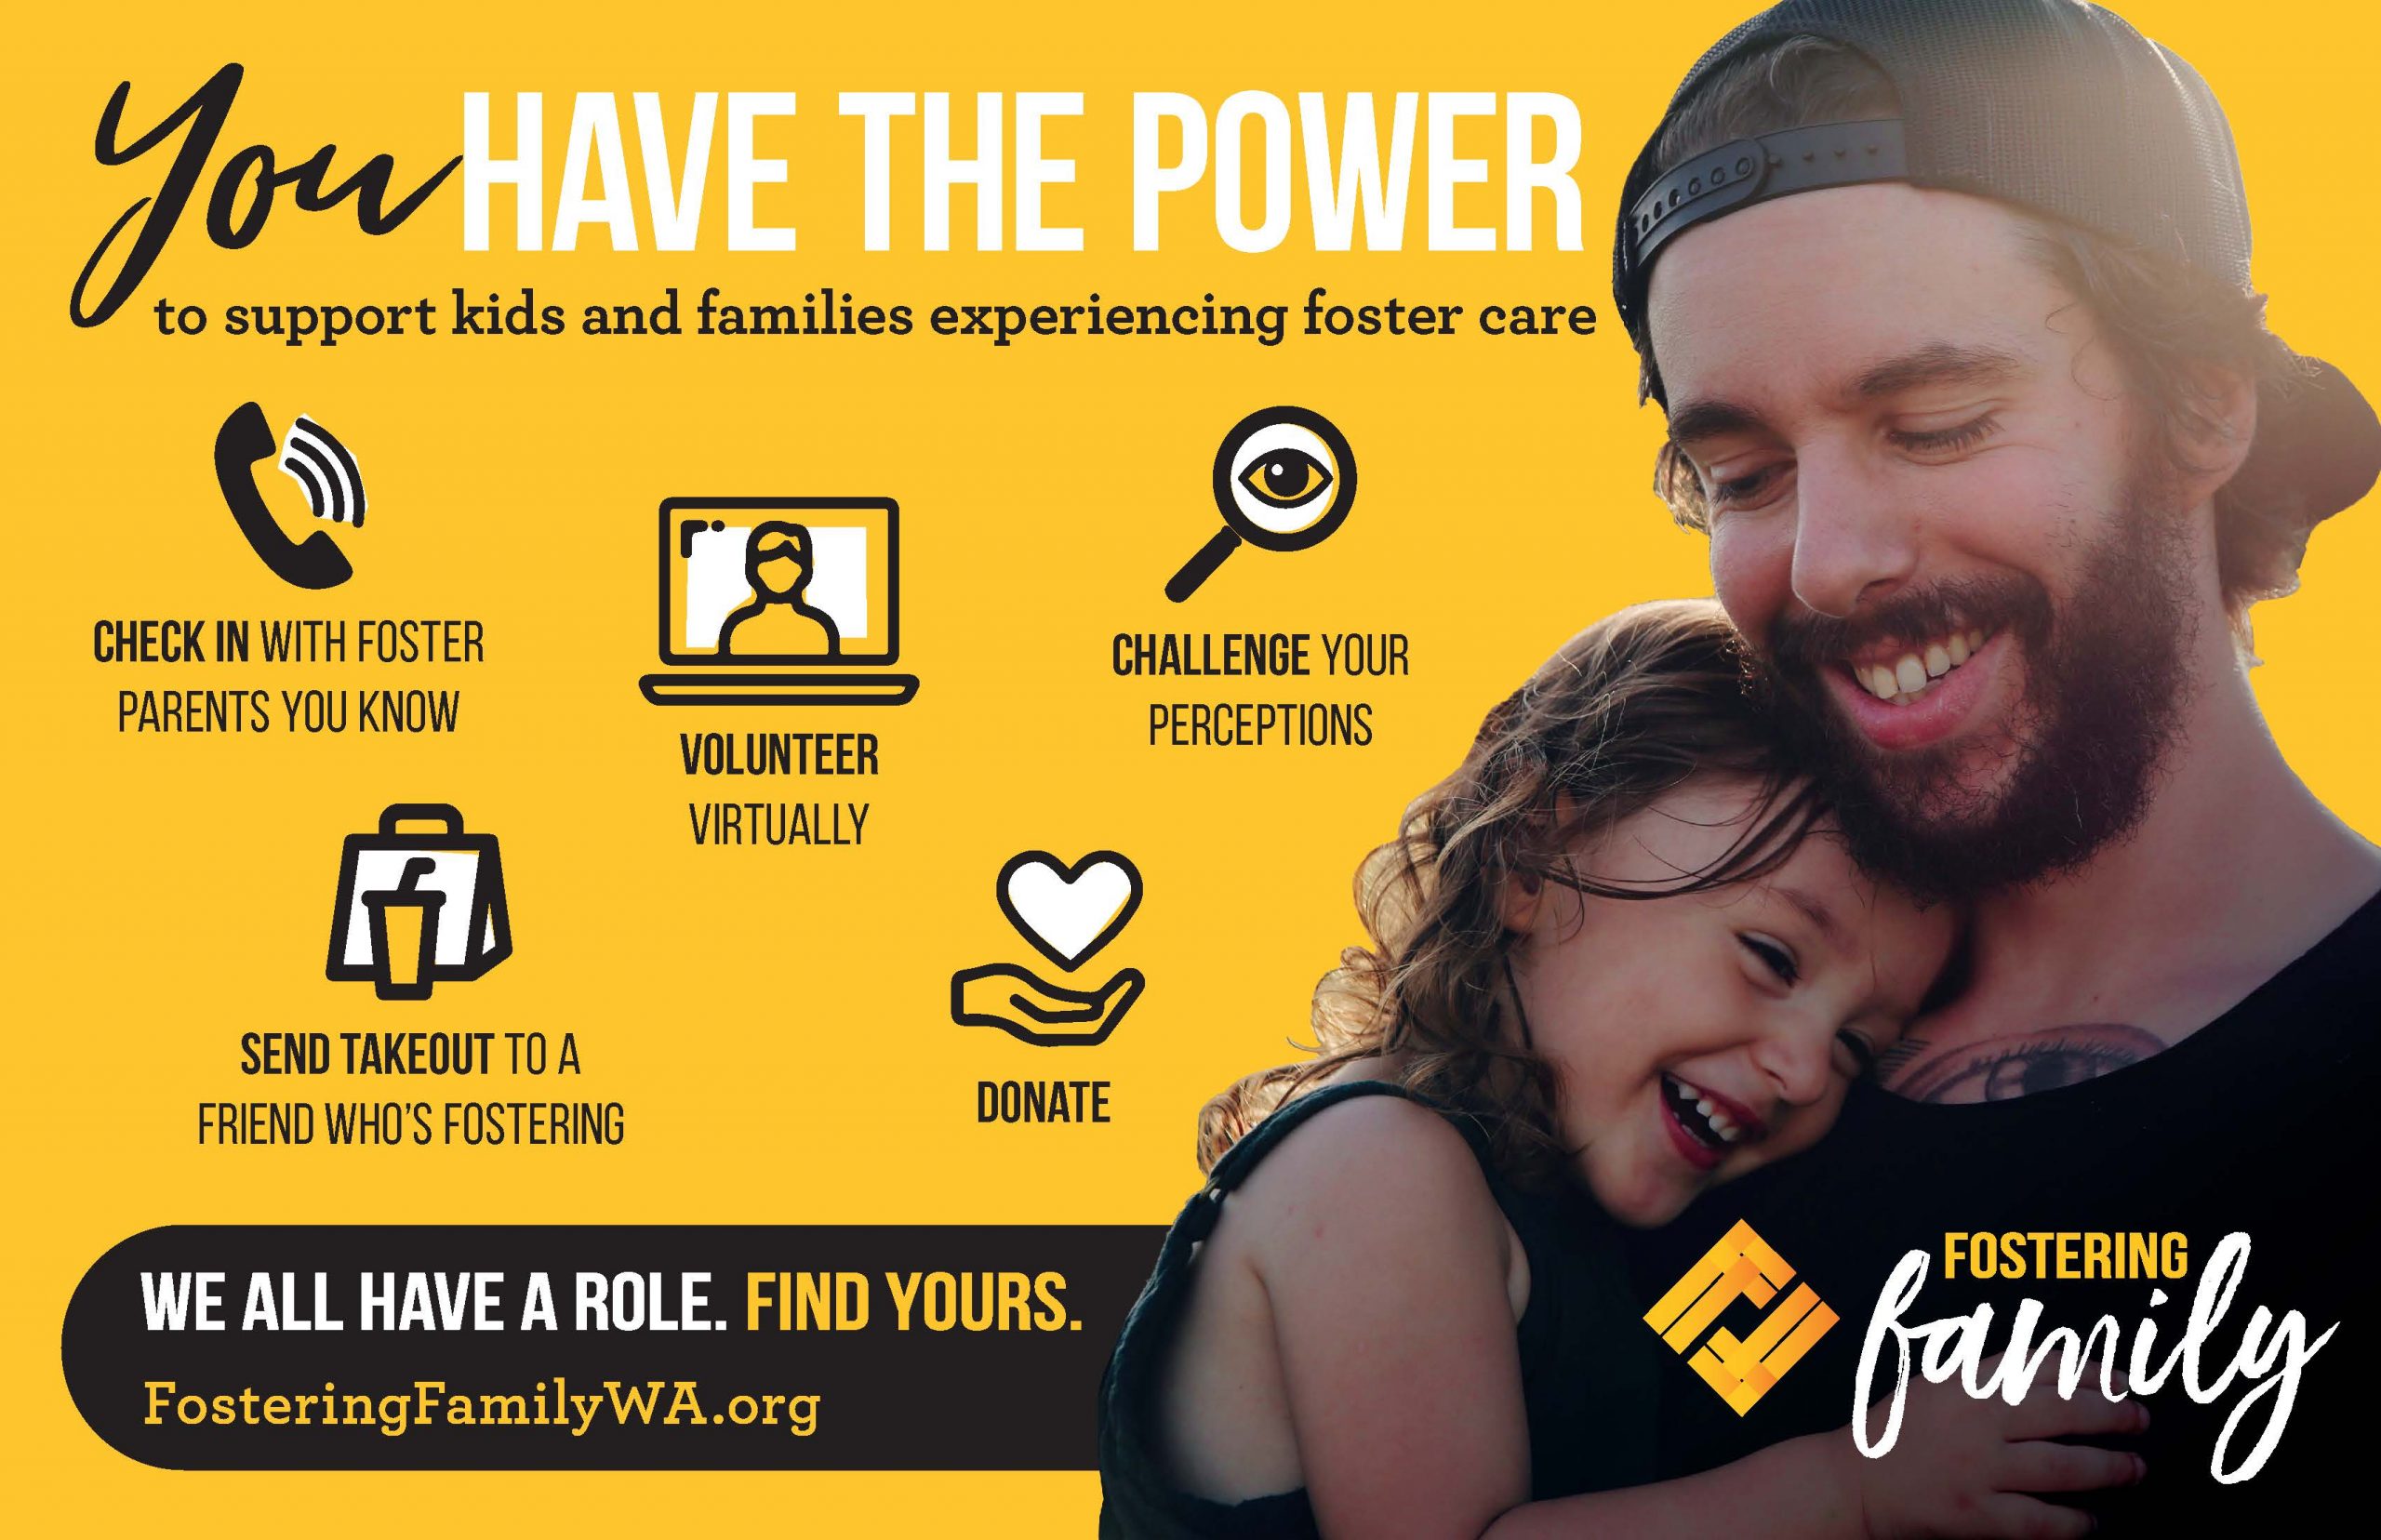 Fostering Family Interior Card Sound Transit in Seattle 2020